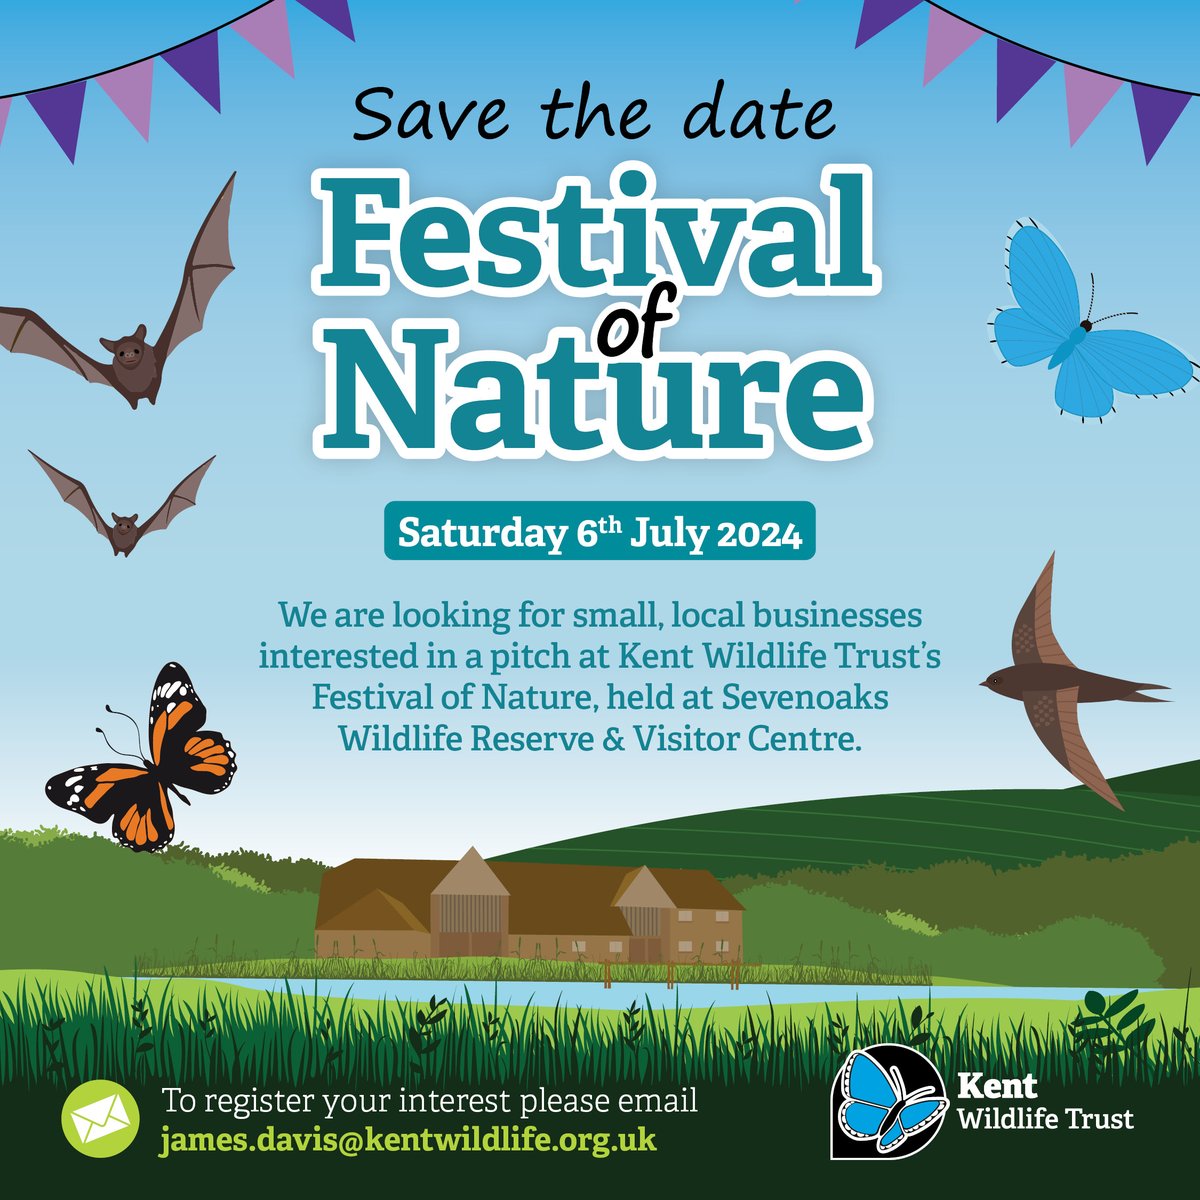 📢Calling all small businesses! 🦔We're looking for small, local businesses interested in a pitch at our upcoming 'Festival of Nature'. Being held at Sevenoaks Wildlife Reserve on Saturday 6th July. Get in touch if you'd like to be part of the fun! #sevenoaks #defendnature